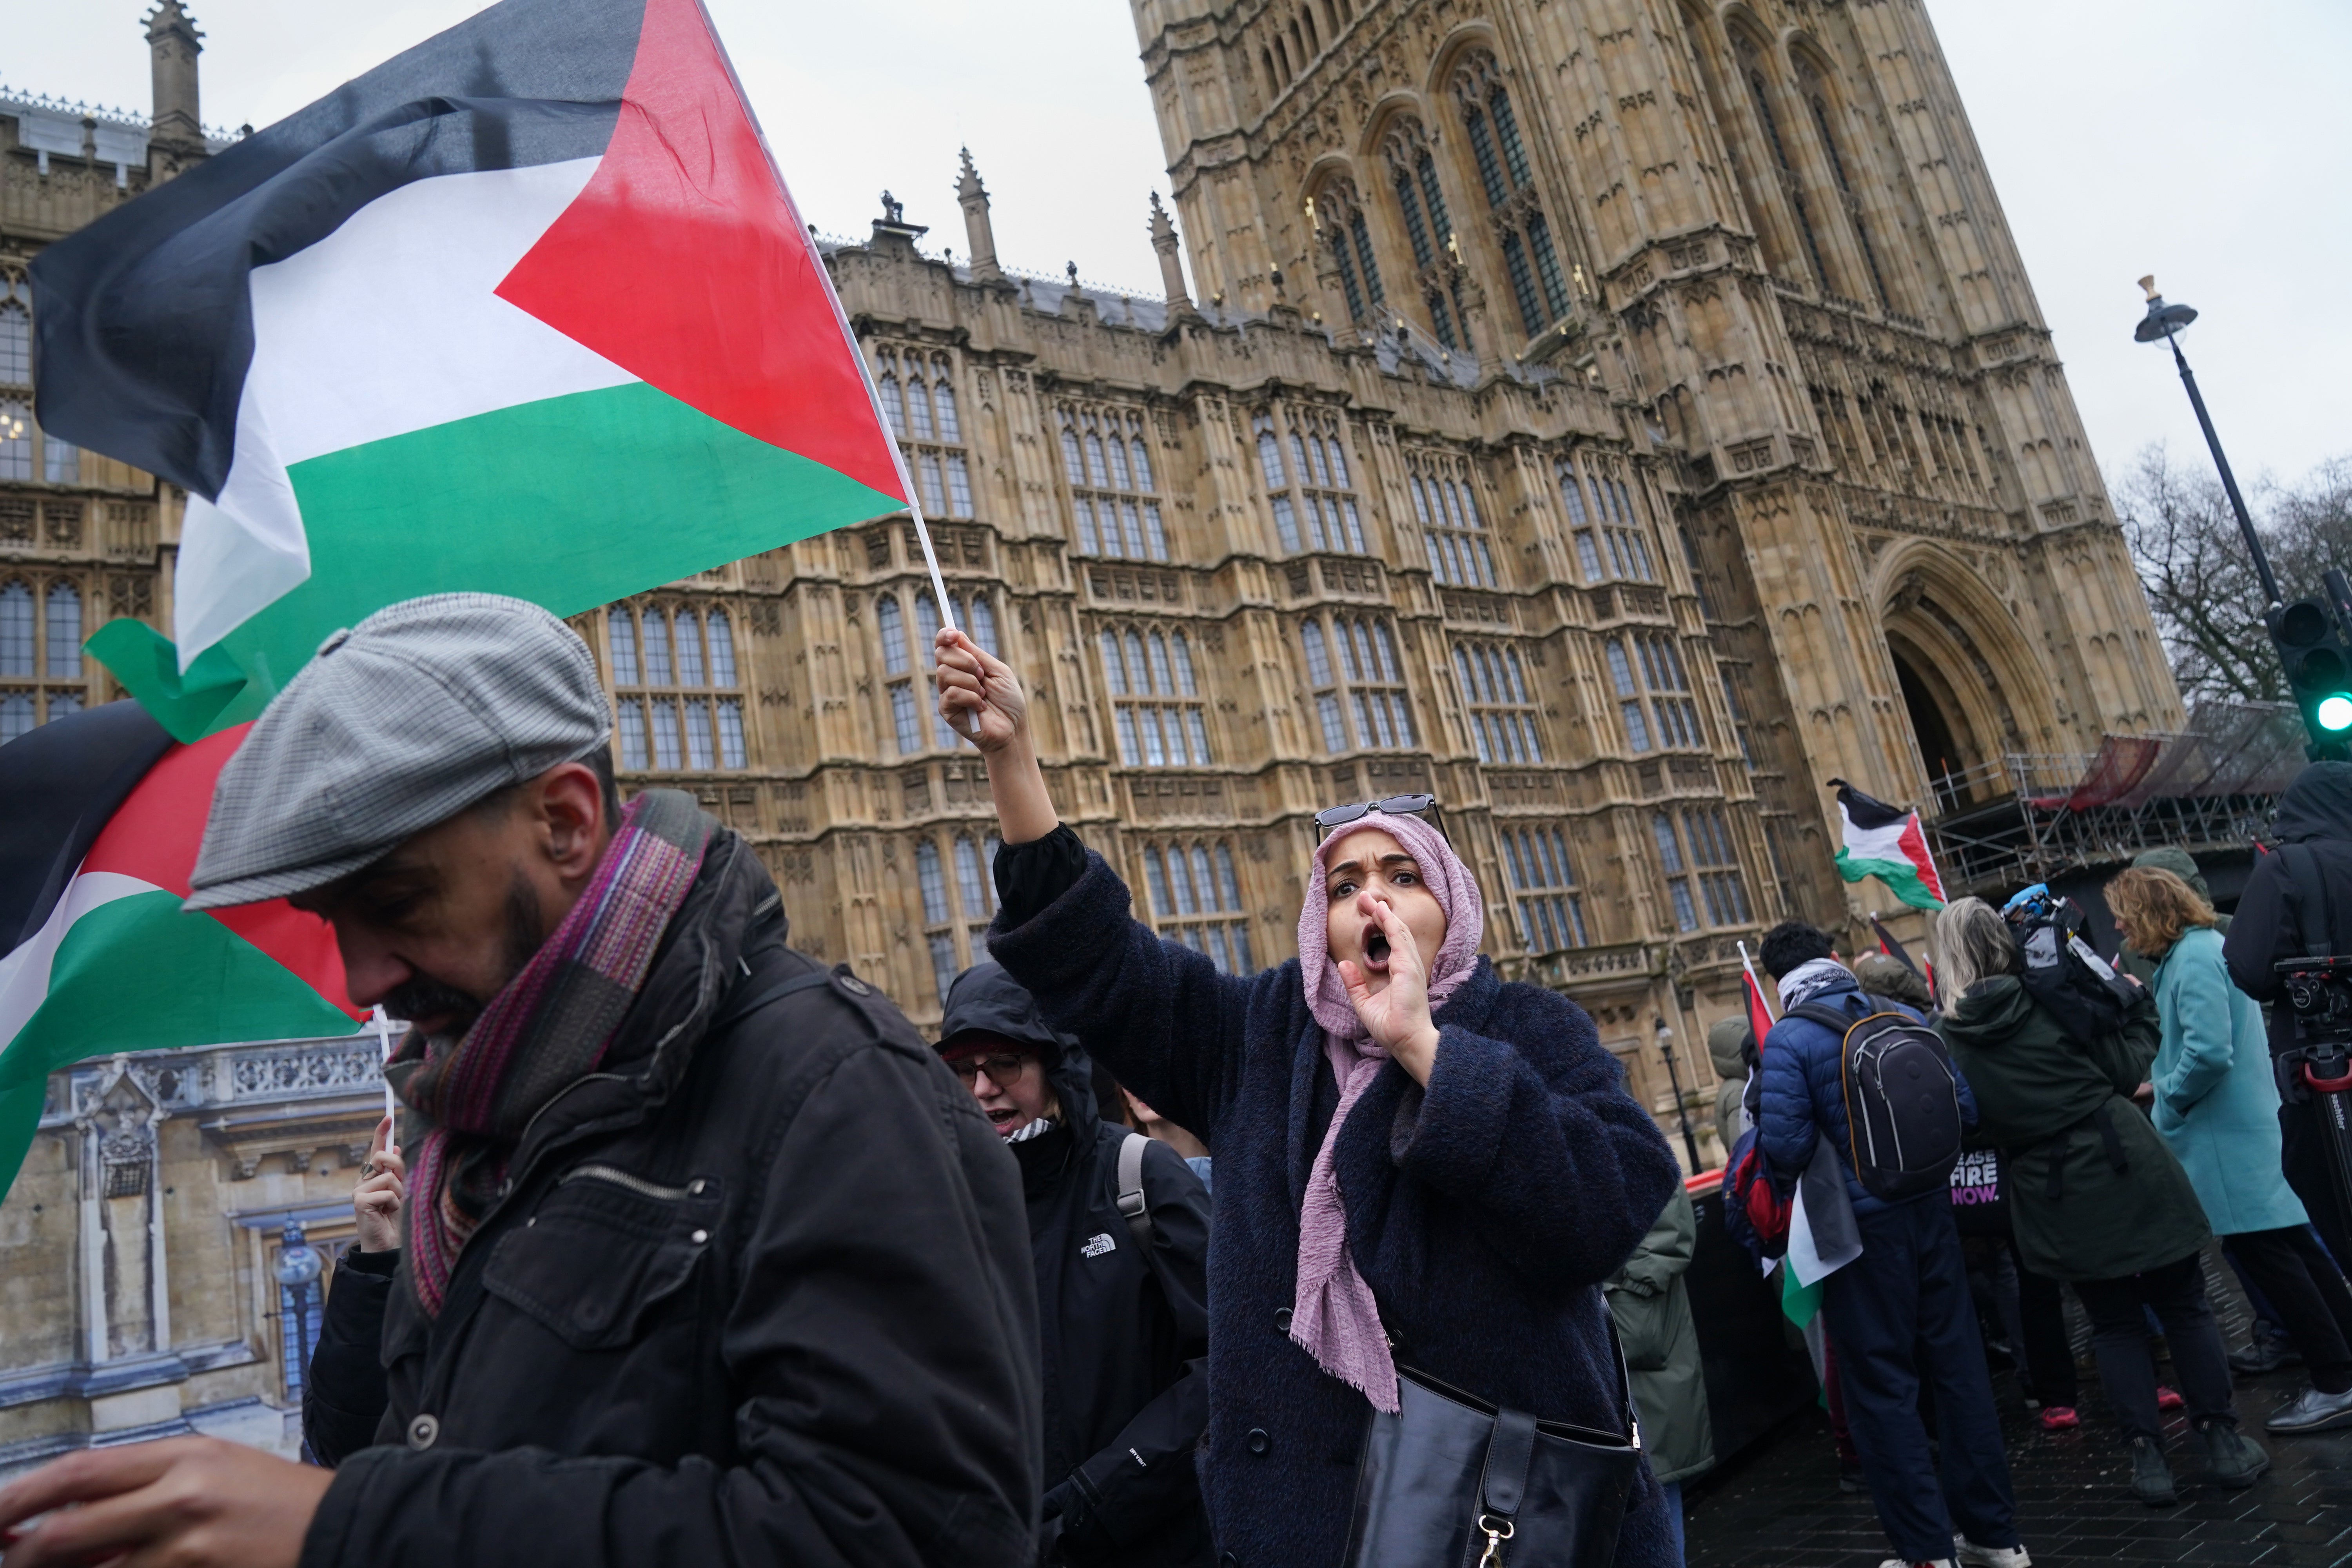 People take part in a Palestine Solidarity Campaign rally outside the Houses of Parliament